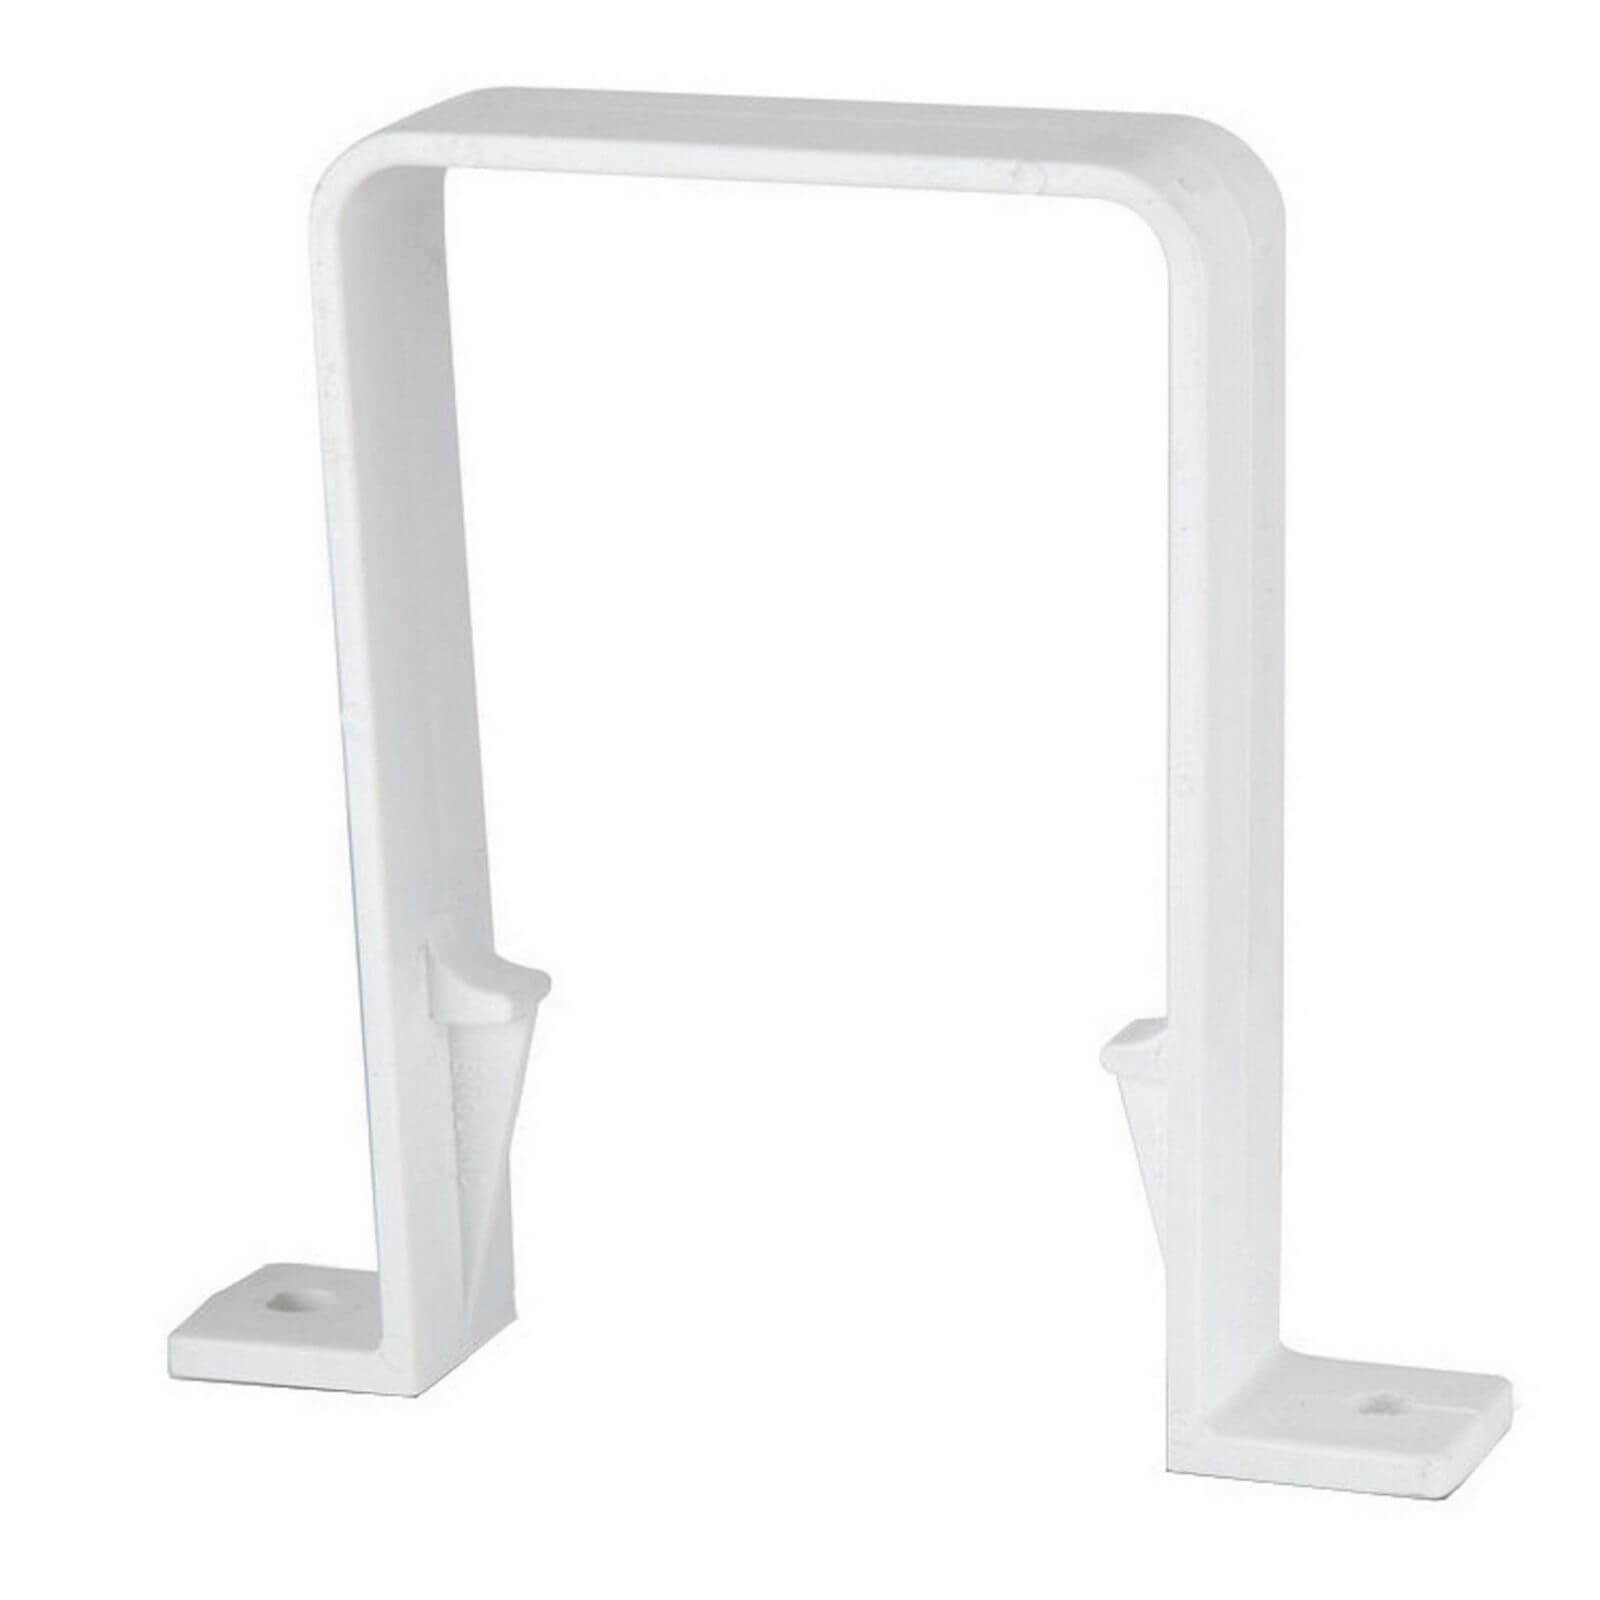 Photo of Polypipe Square Downpipe Bracket - 65mm - White